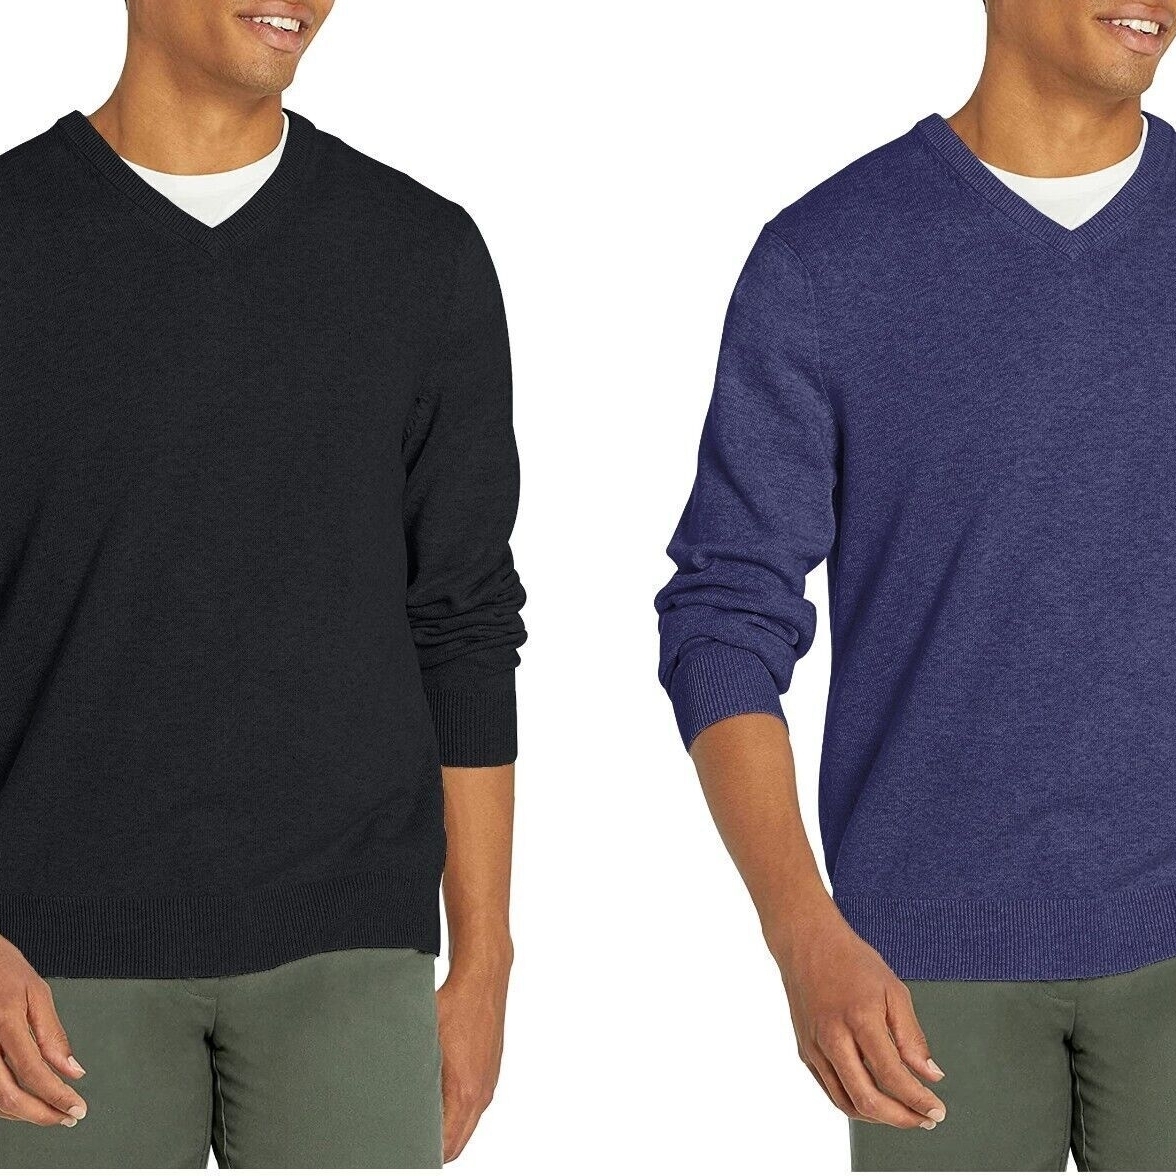 2-Pack Men's Casual Cozy Ultra Soft Slim Fit Warm Knit Pullover V-Neck Sweater - Black&Blue, XX-Large